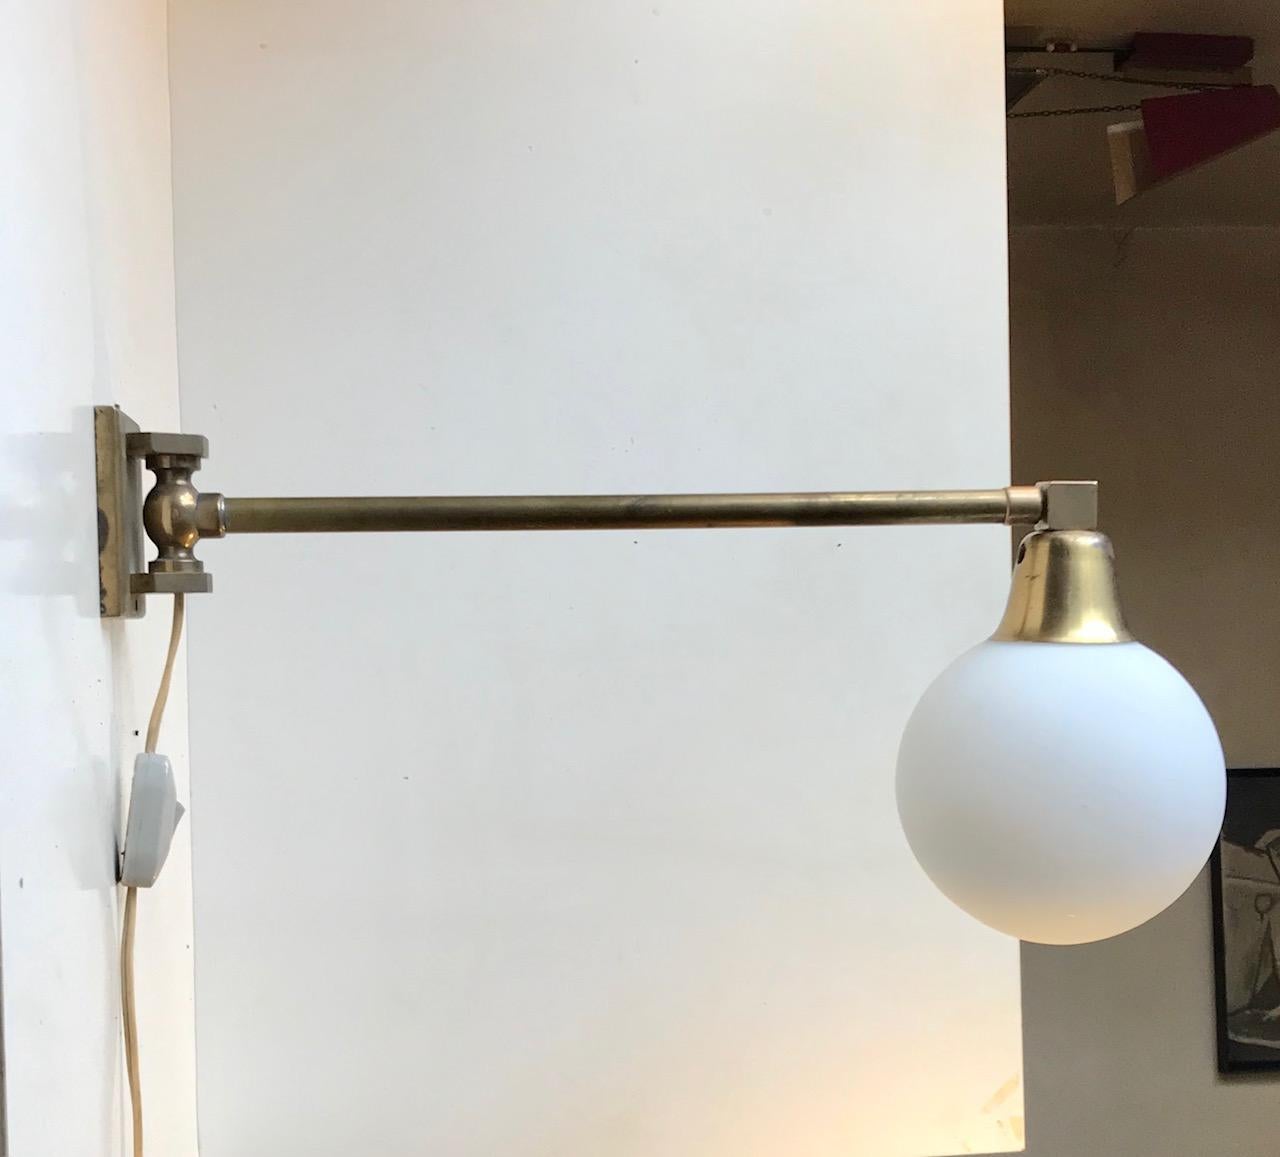 Side to side adjustable wall lamp composed of a solid heavy stock brass 'body' installed with a opaline ball shade. It was designed and manufactured in Scandinavia during the 1950s or 60s. The style is reminiscent of Svend Aage Holm-Sørensen and